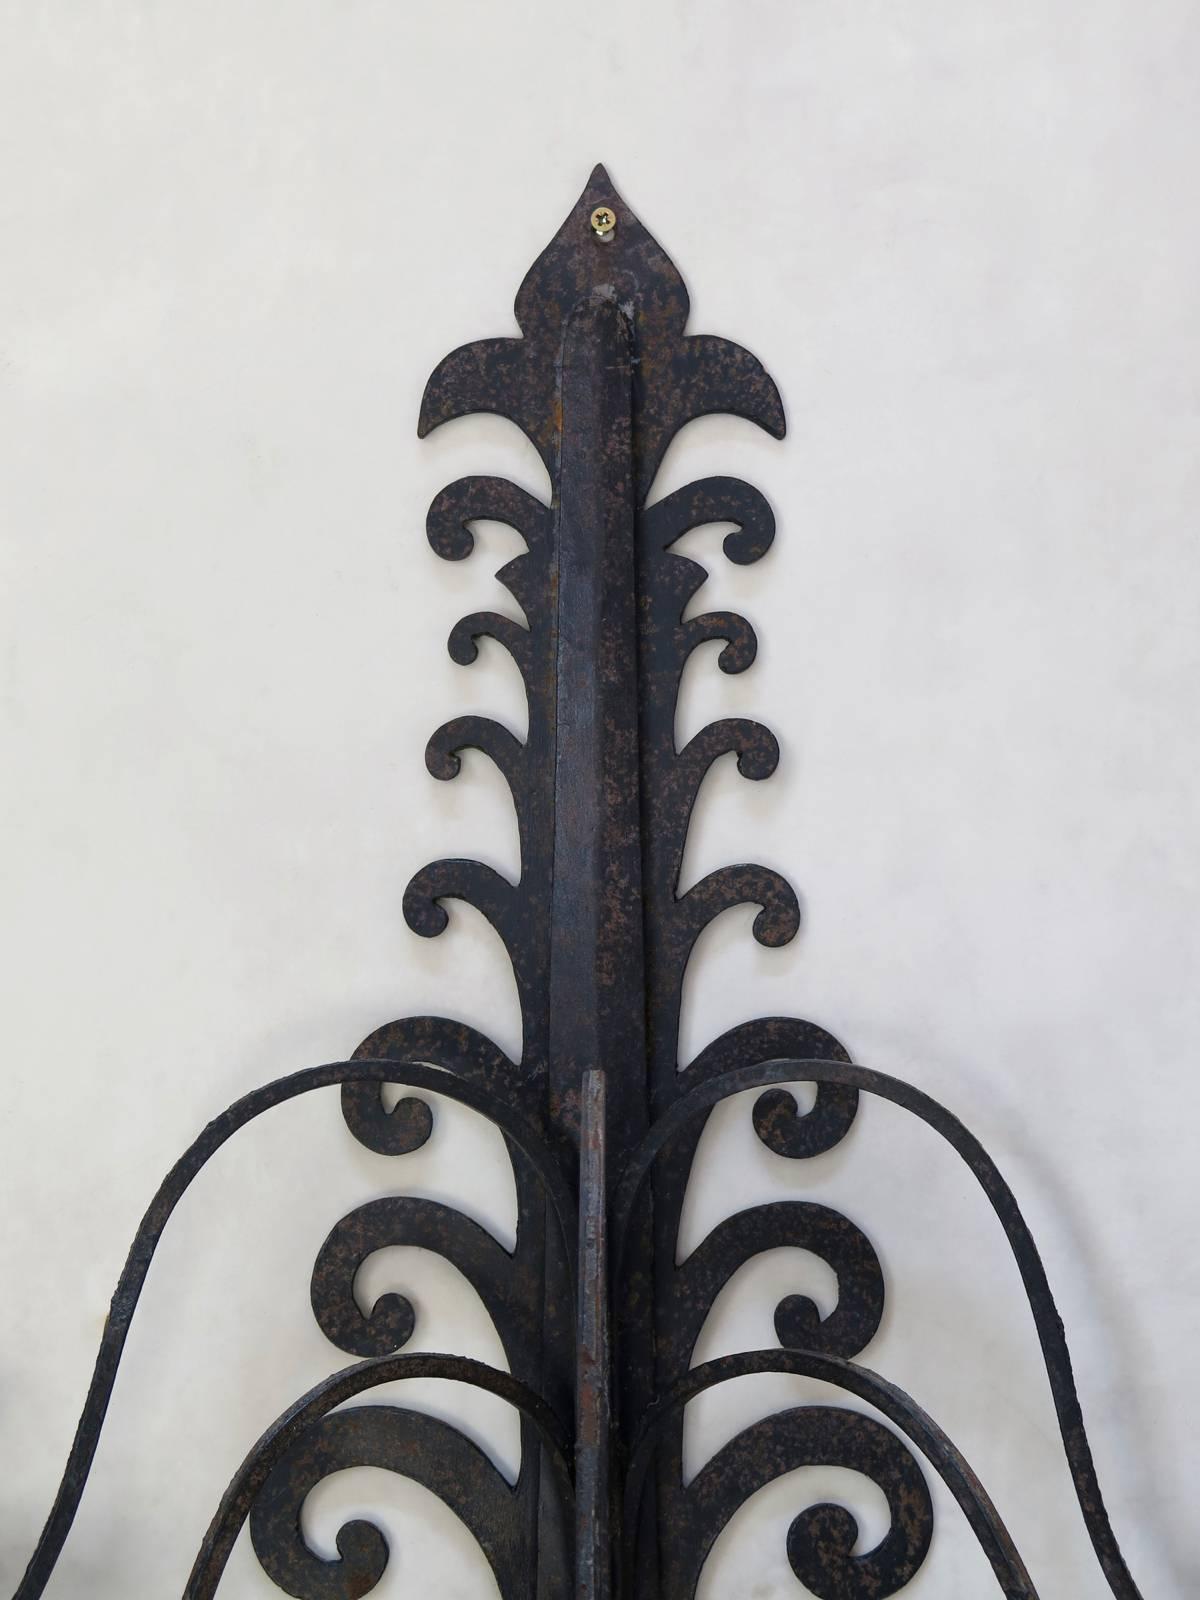 Very lovely set of seven iron sconces. Intricate cut-out design and rivet-decor. Each sconce has seven arms. Originally for use with candles, but could be wired.